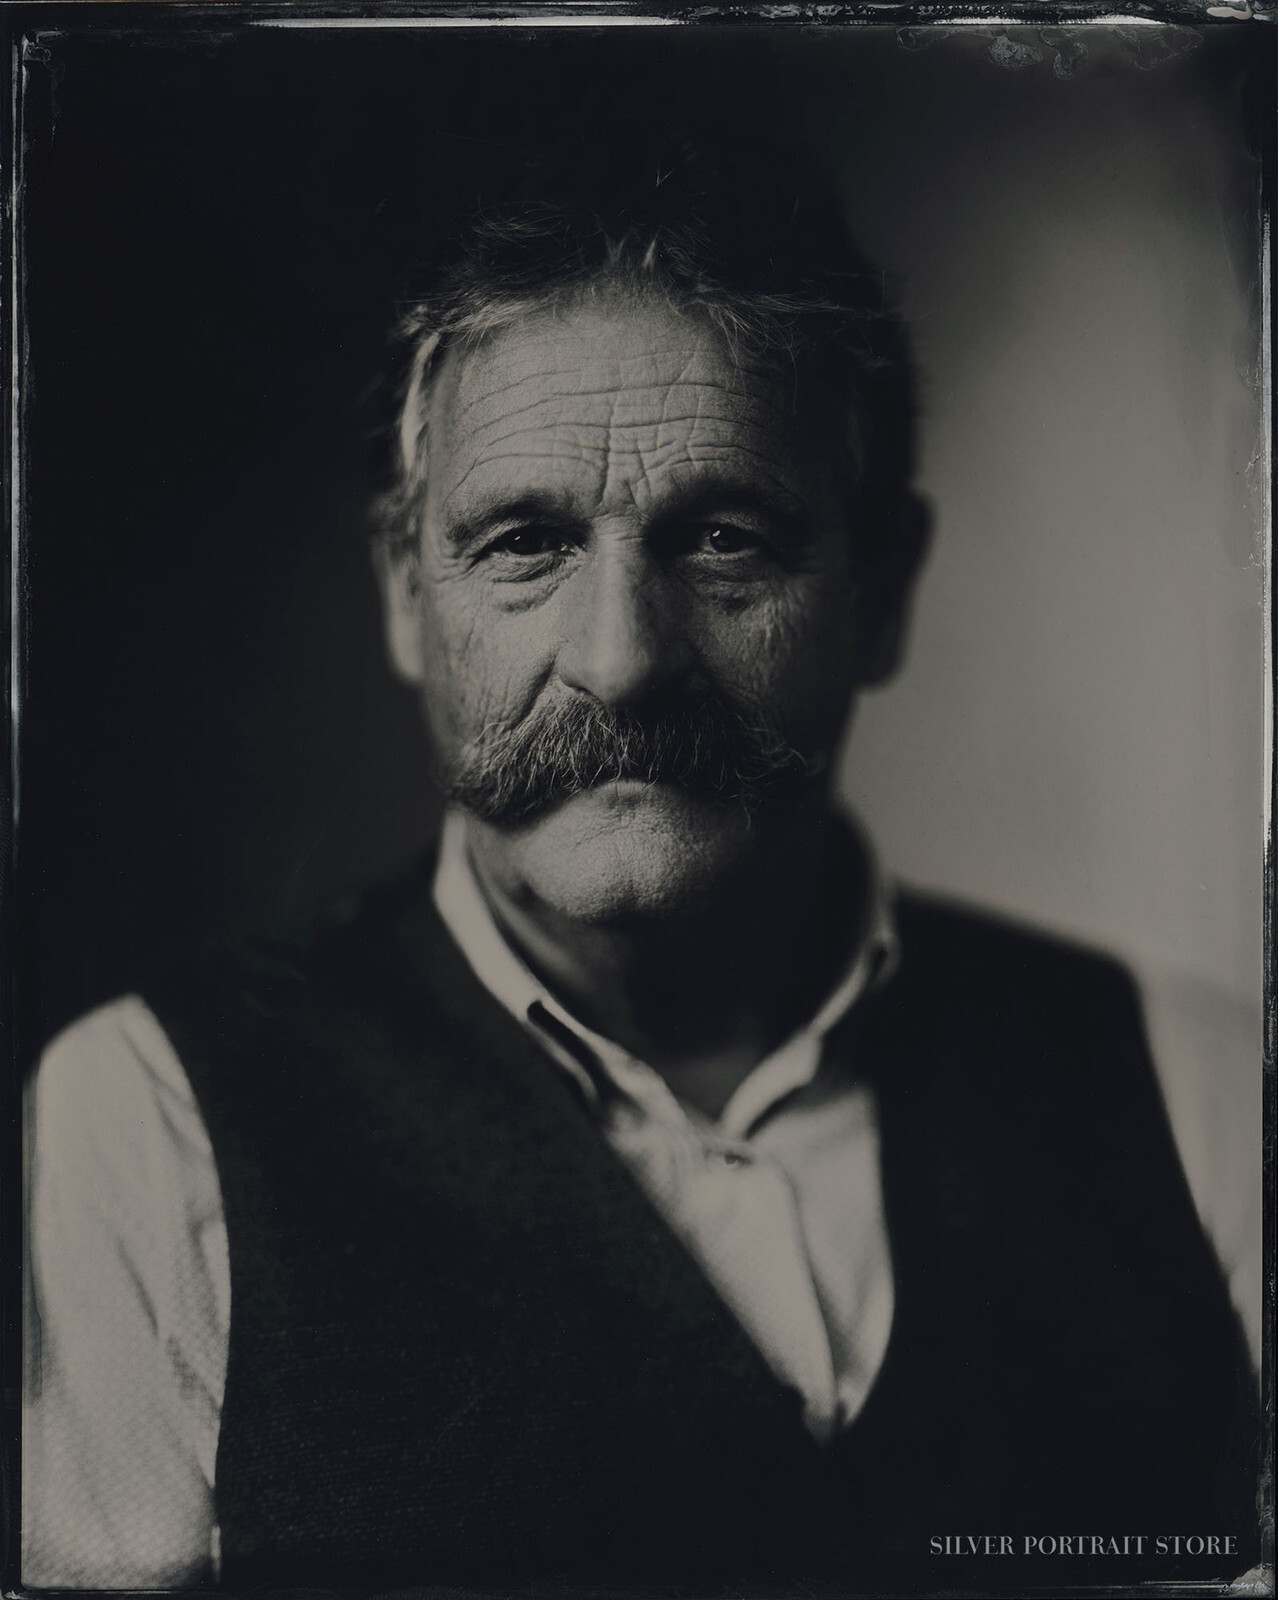 Cees-Silver Portrait Store-scan from Wet plate collodion-Tintype 20 x 25 cm.